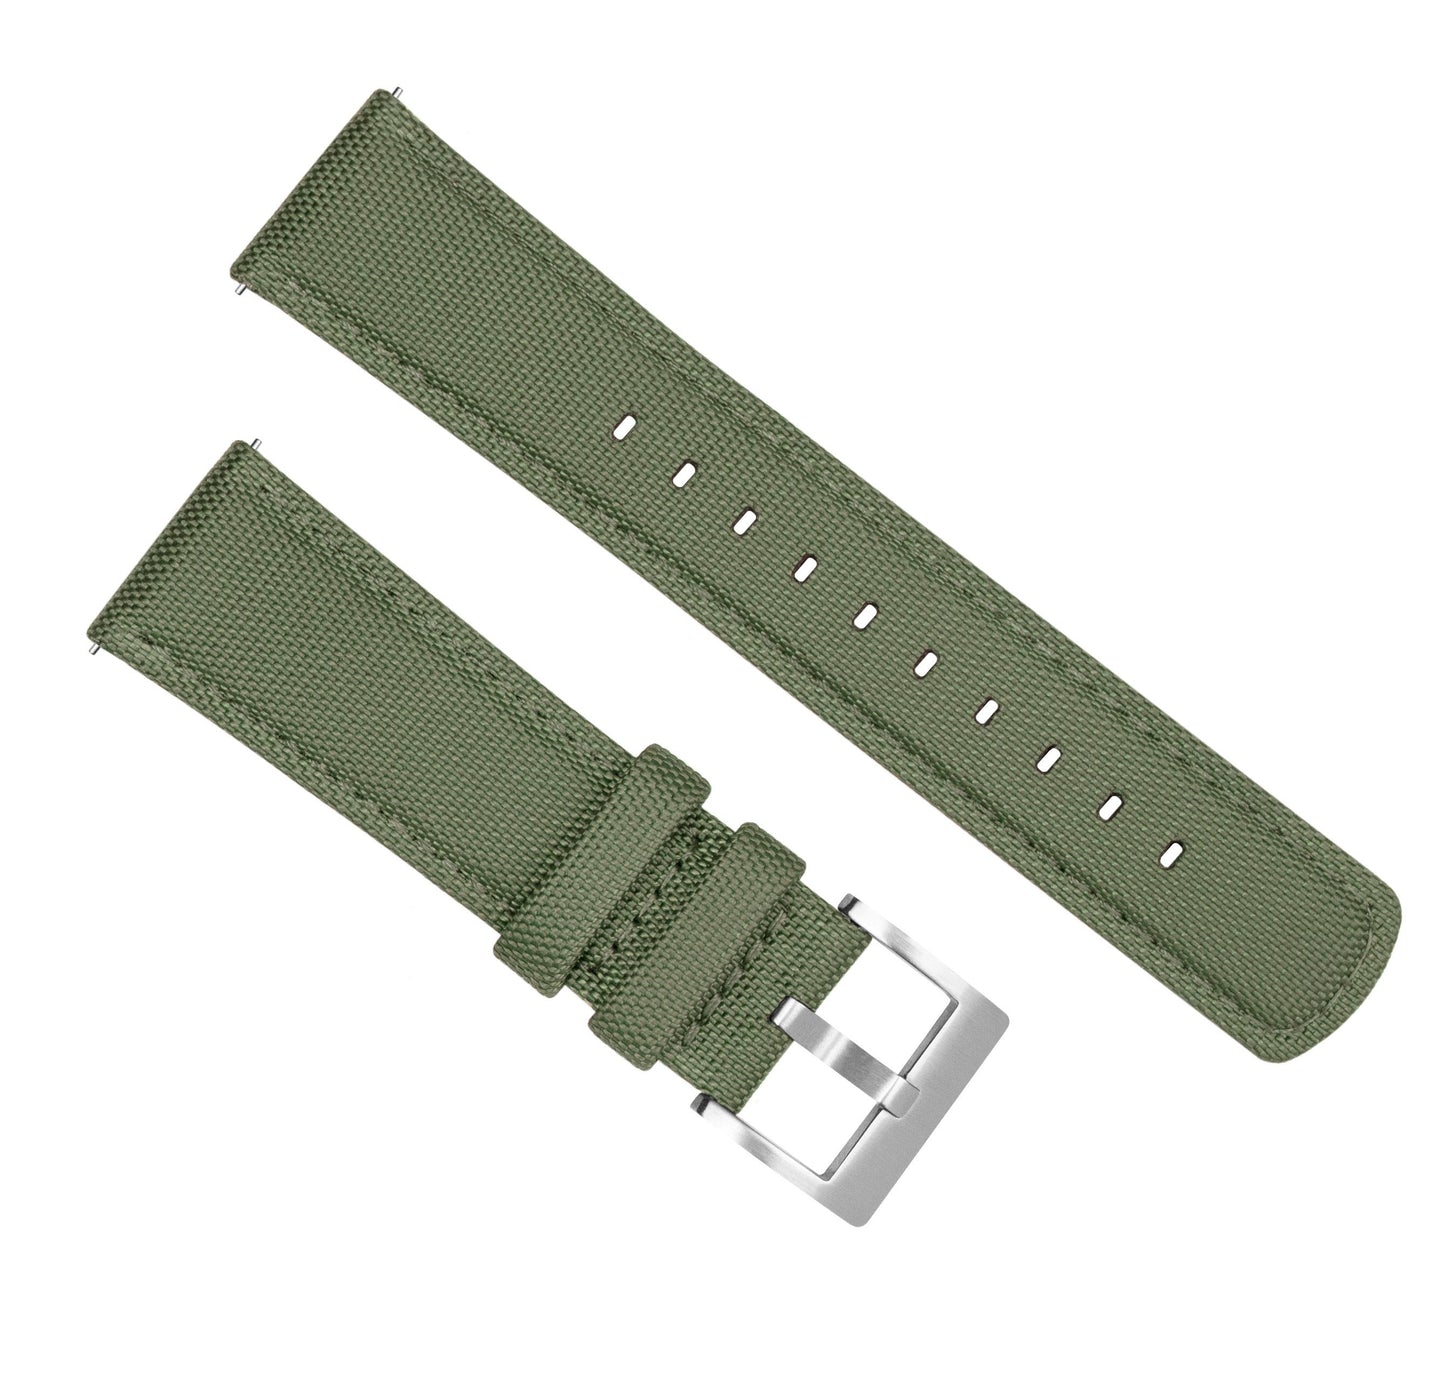 Fossil Gen 5 | Sailcloth Quick Release | Army Green - Barton Watch Bands